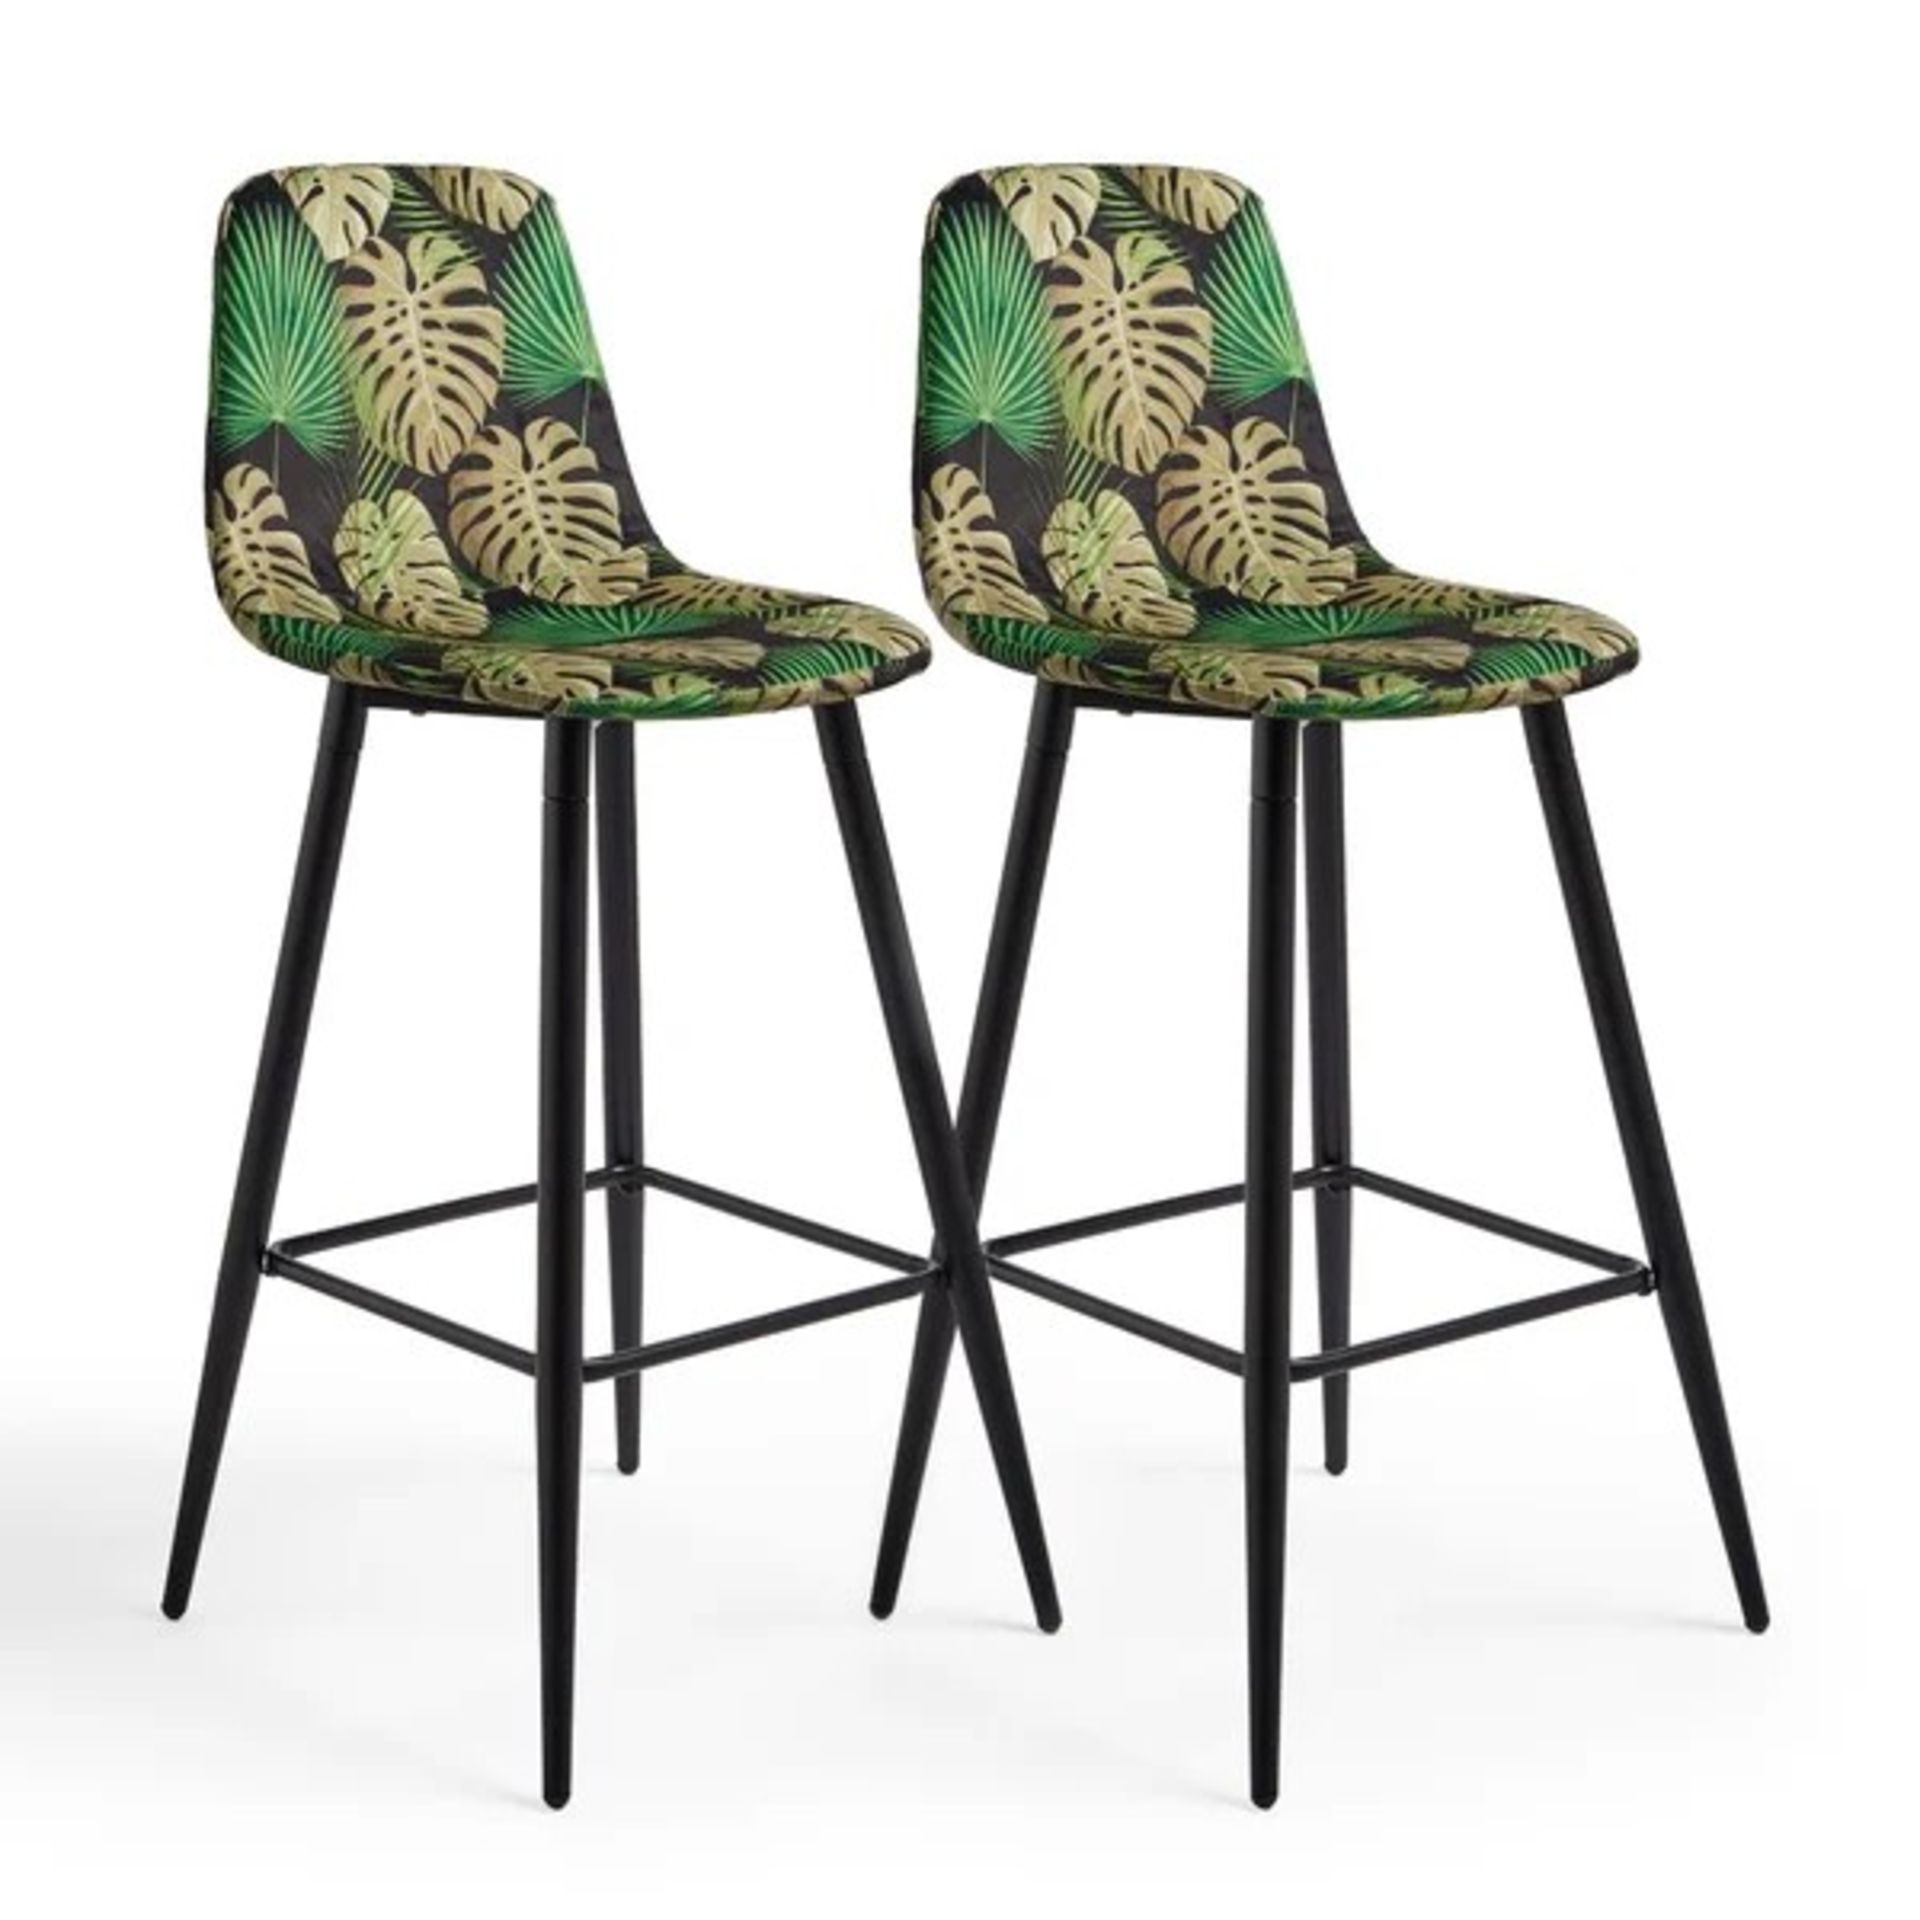 Hearst Bar Stool (Set of 2) - RRP £213.99. - Image 2 of 4